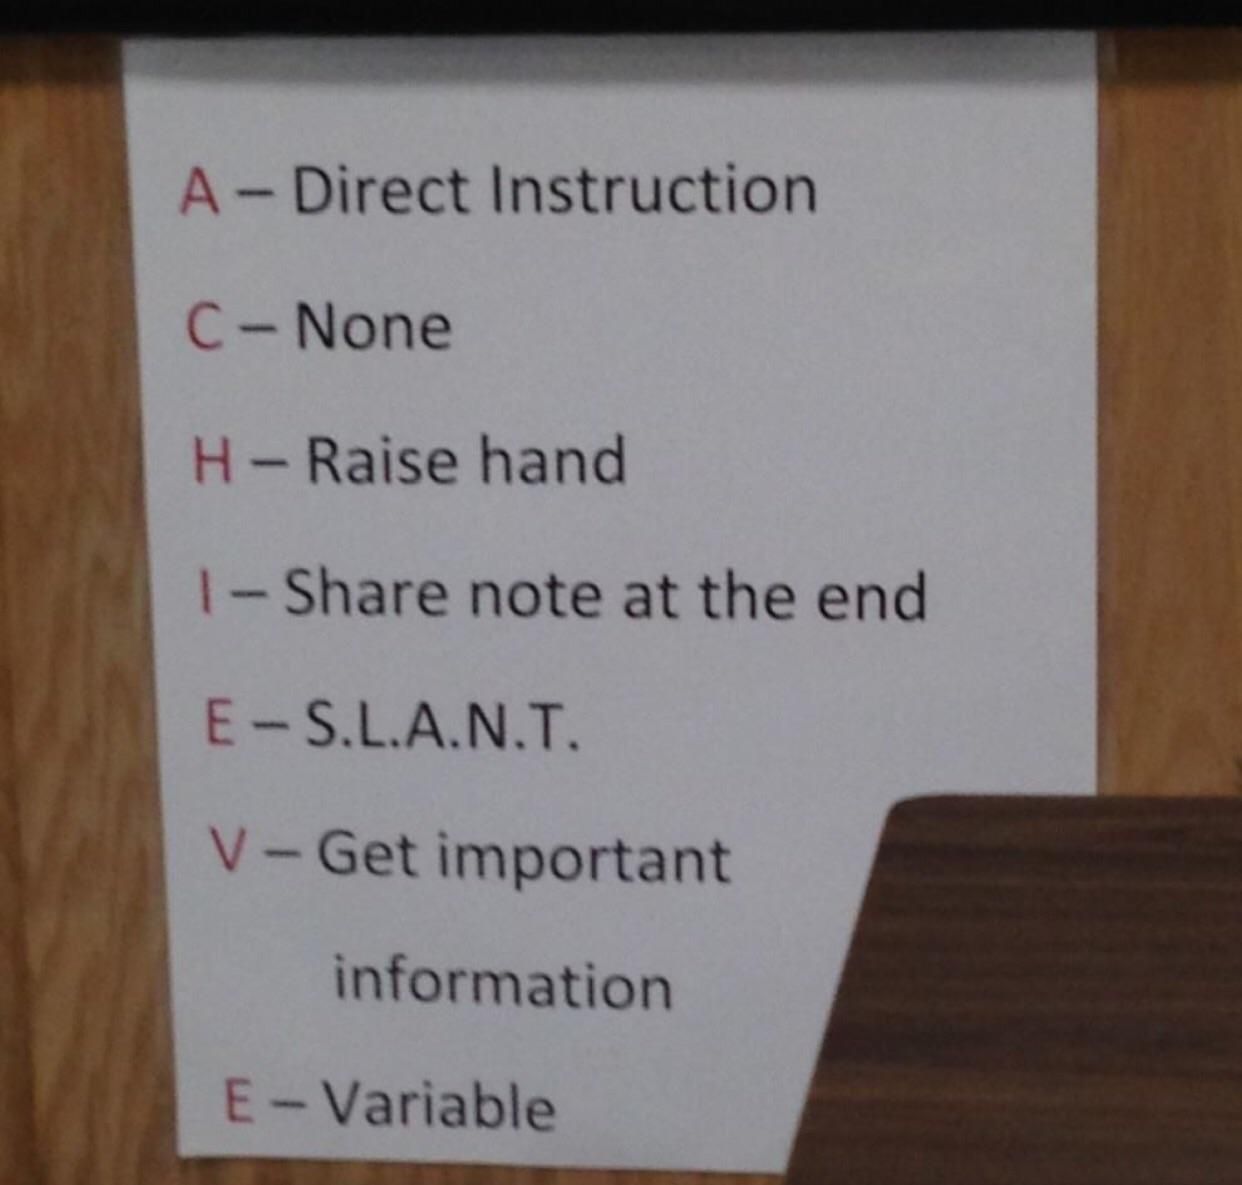 amazing picture of that's not how acronyms work - A Direct Instruction C None HRaise hand 1 note at the end ES.L.A.N.T. VGet important information EVariable